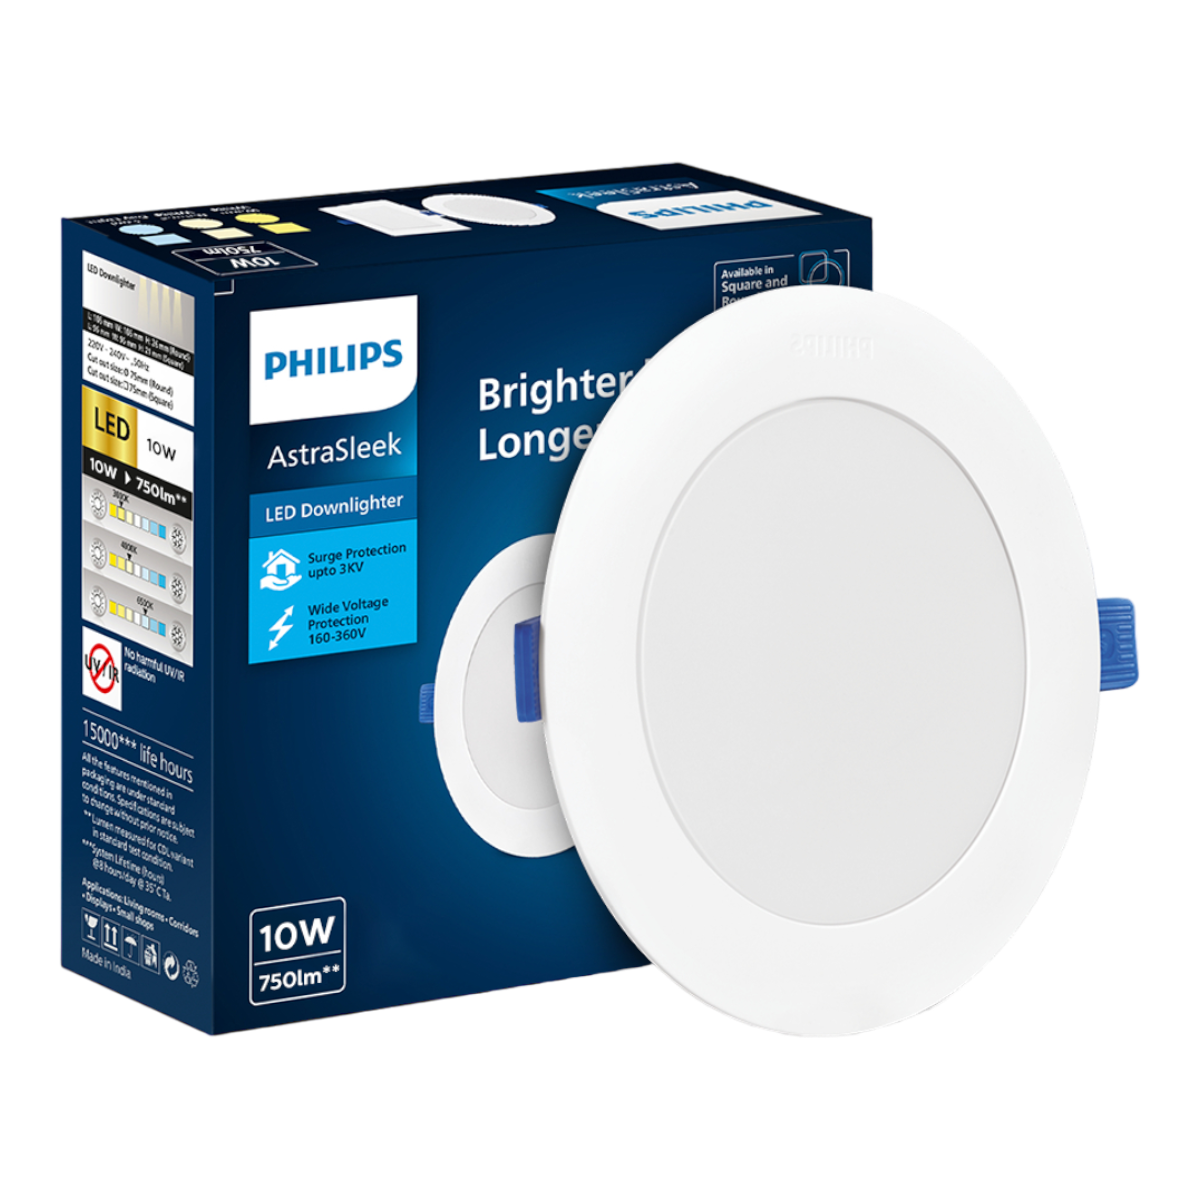 Philips Lighting Price List Download ,Vashi Integrated Solutions